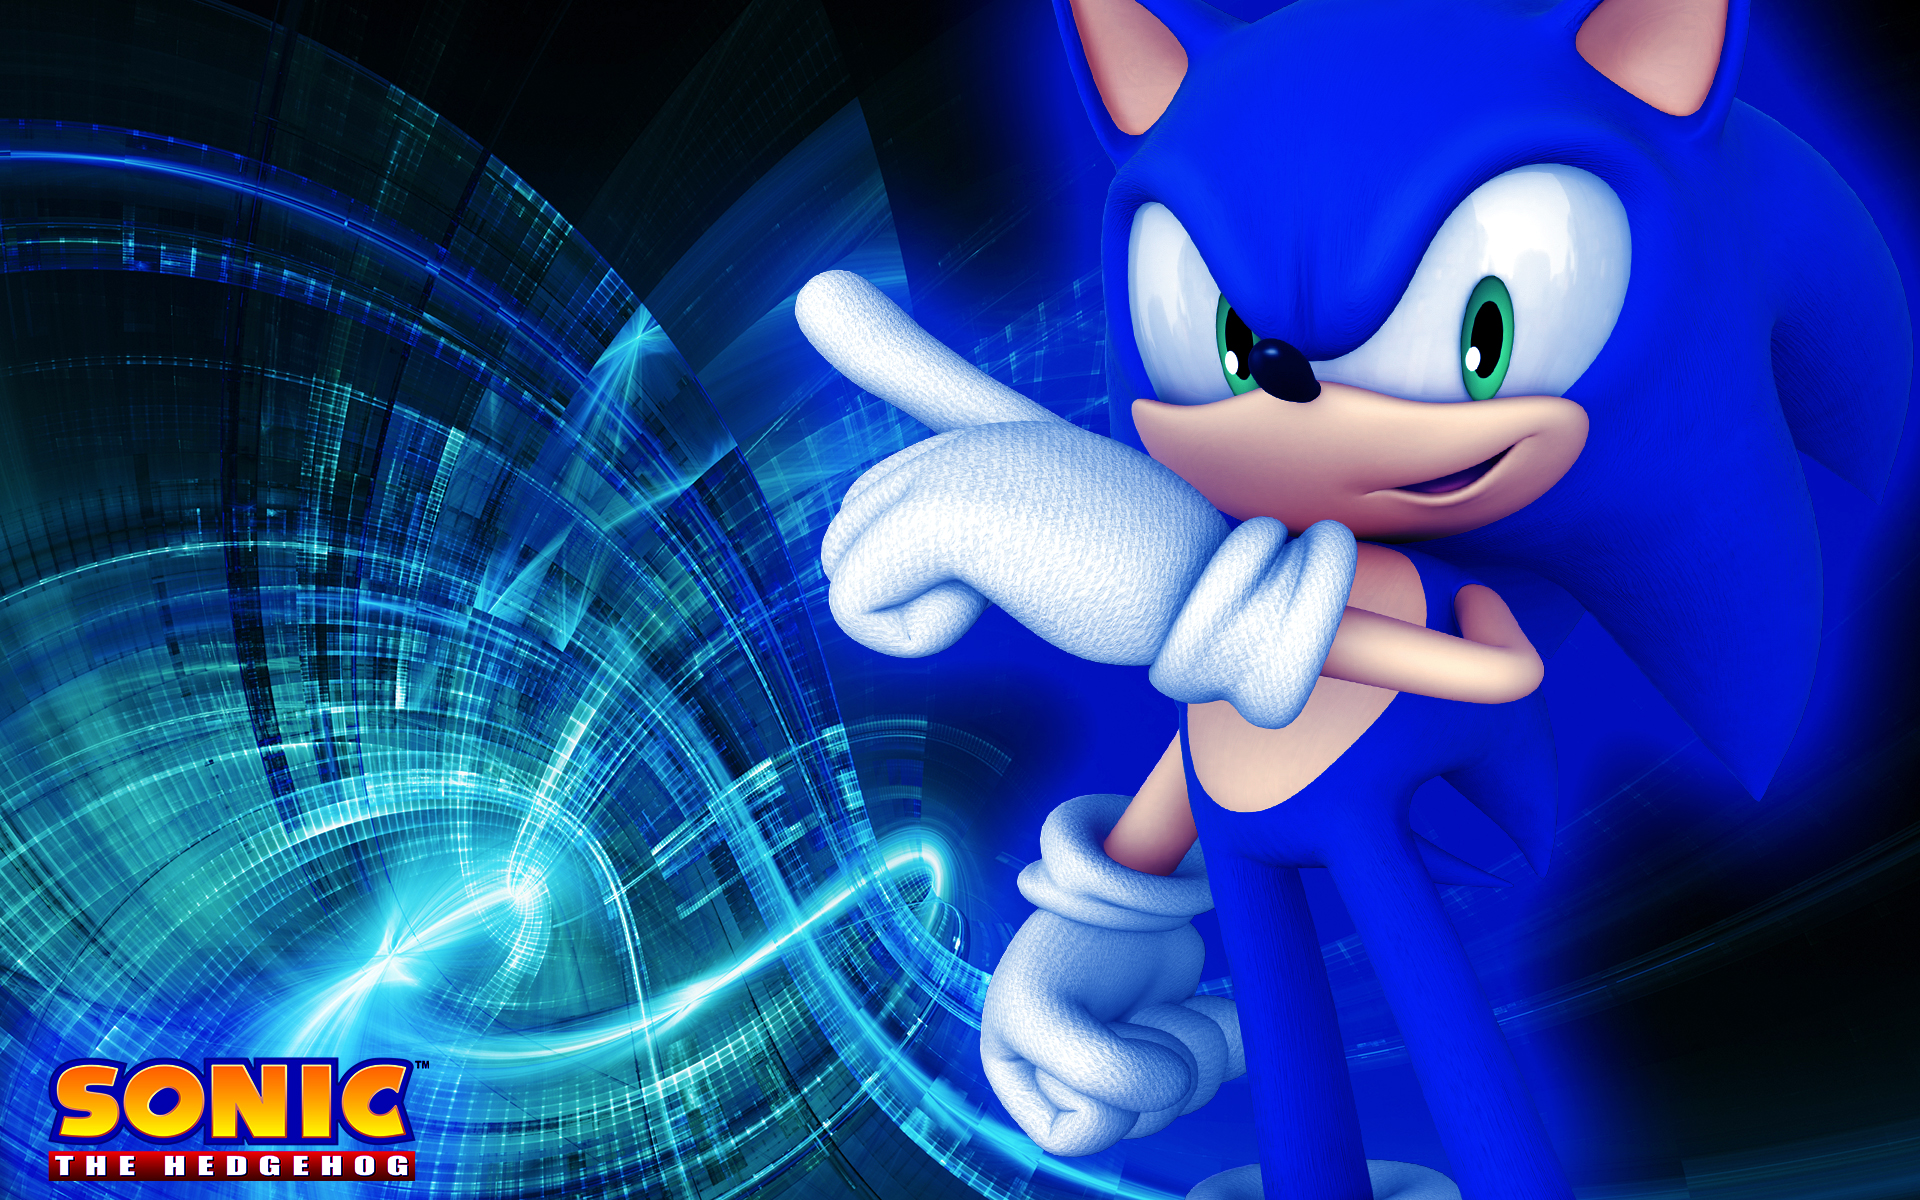 Sonic The Hedgehog Backgrounds High Quality.